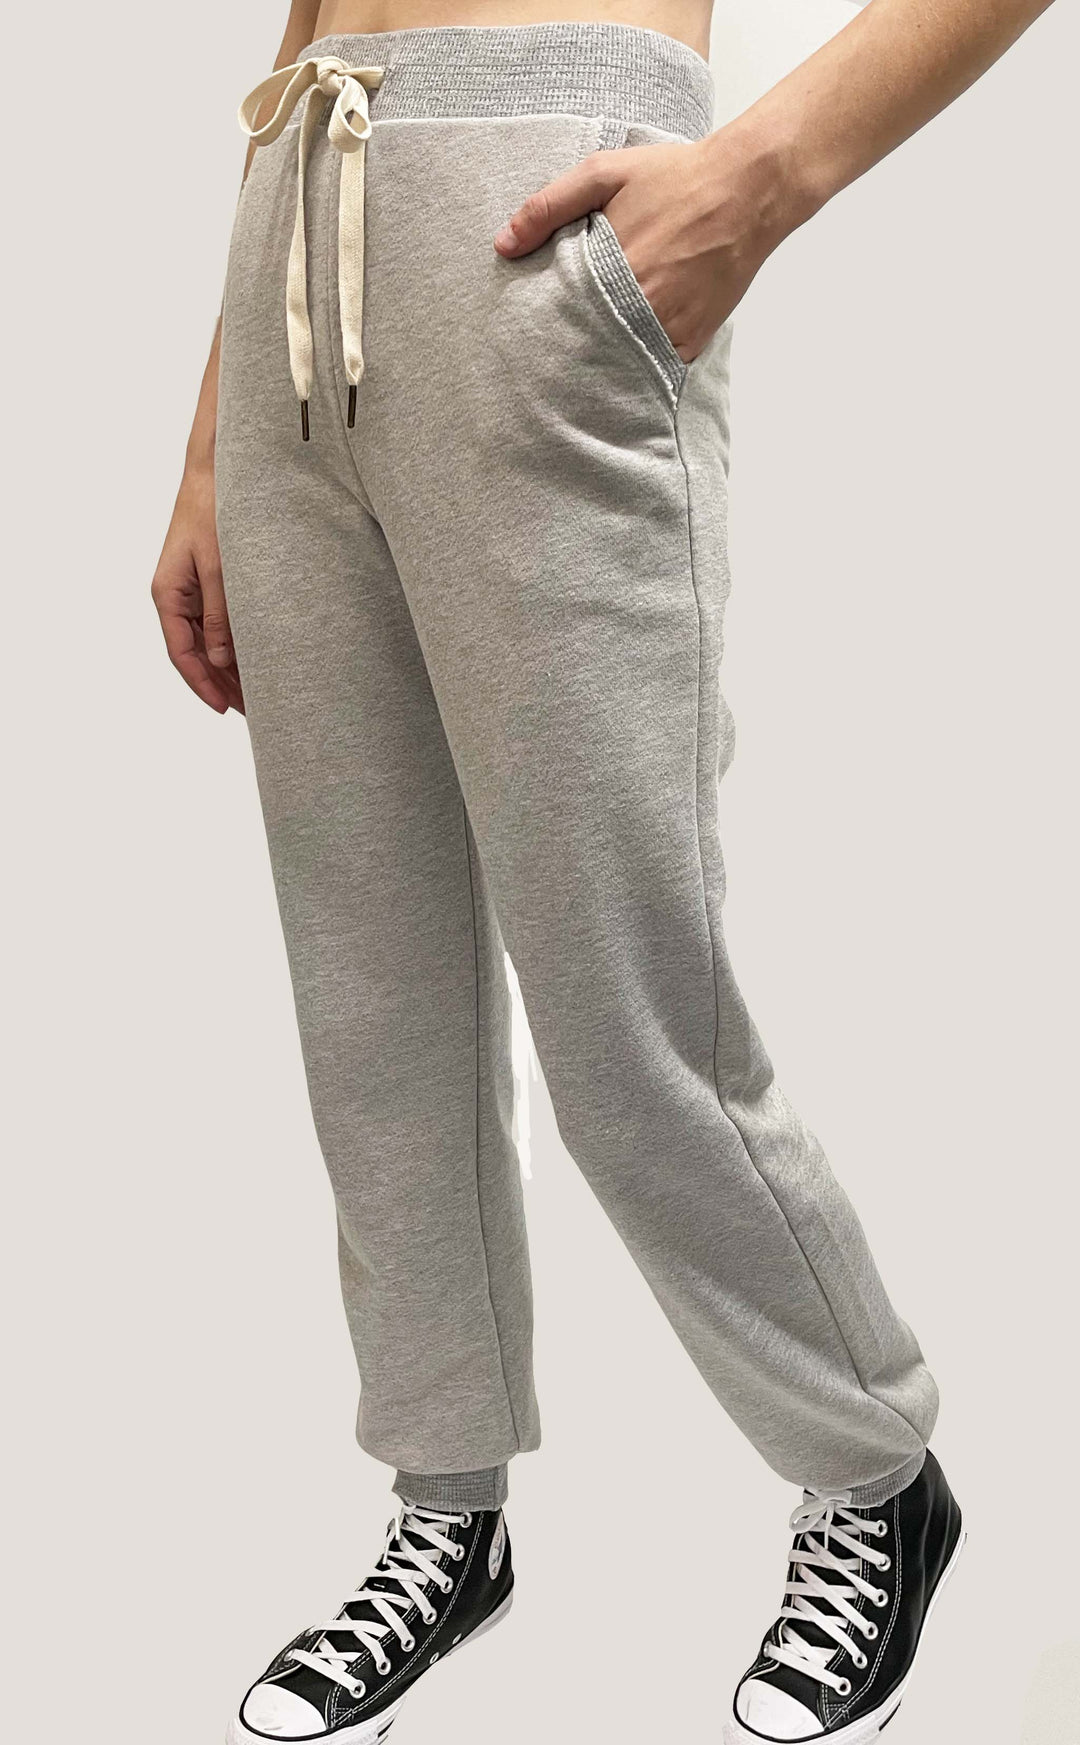 NEW DAY HEATHERED JOGGER - HEATHER GREY - Kingfisher Road - Online Boutique